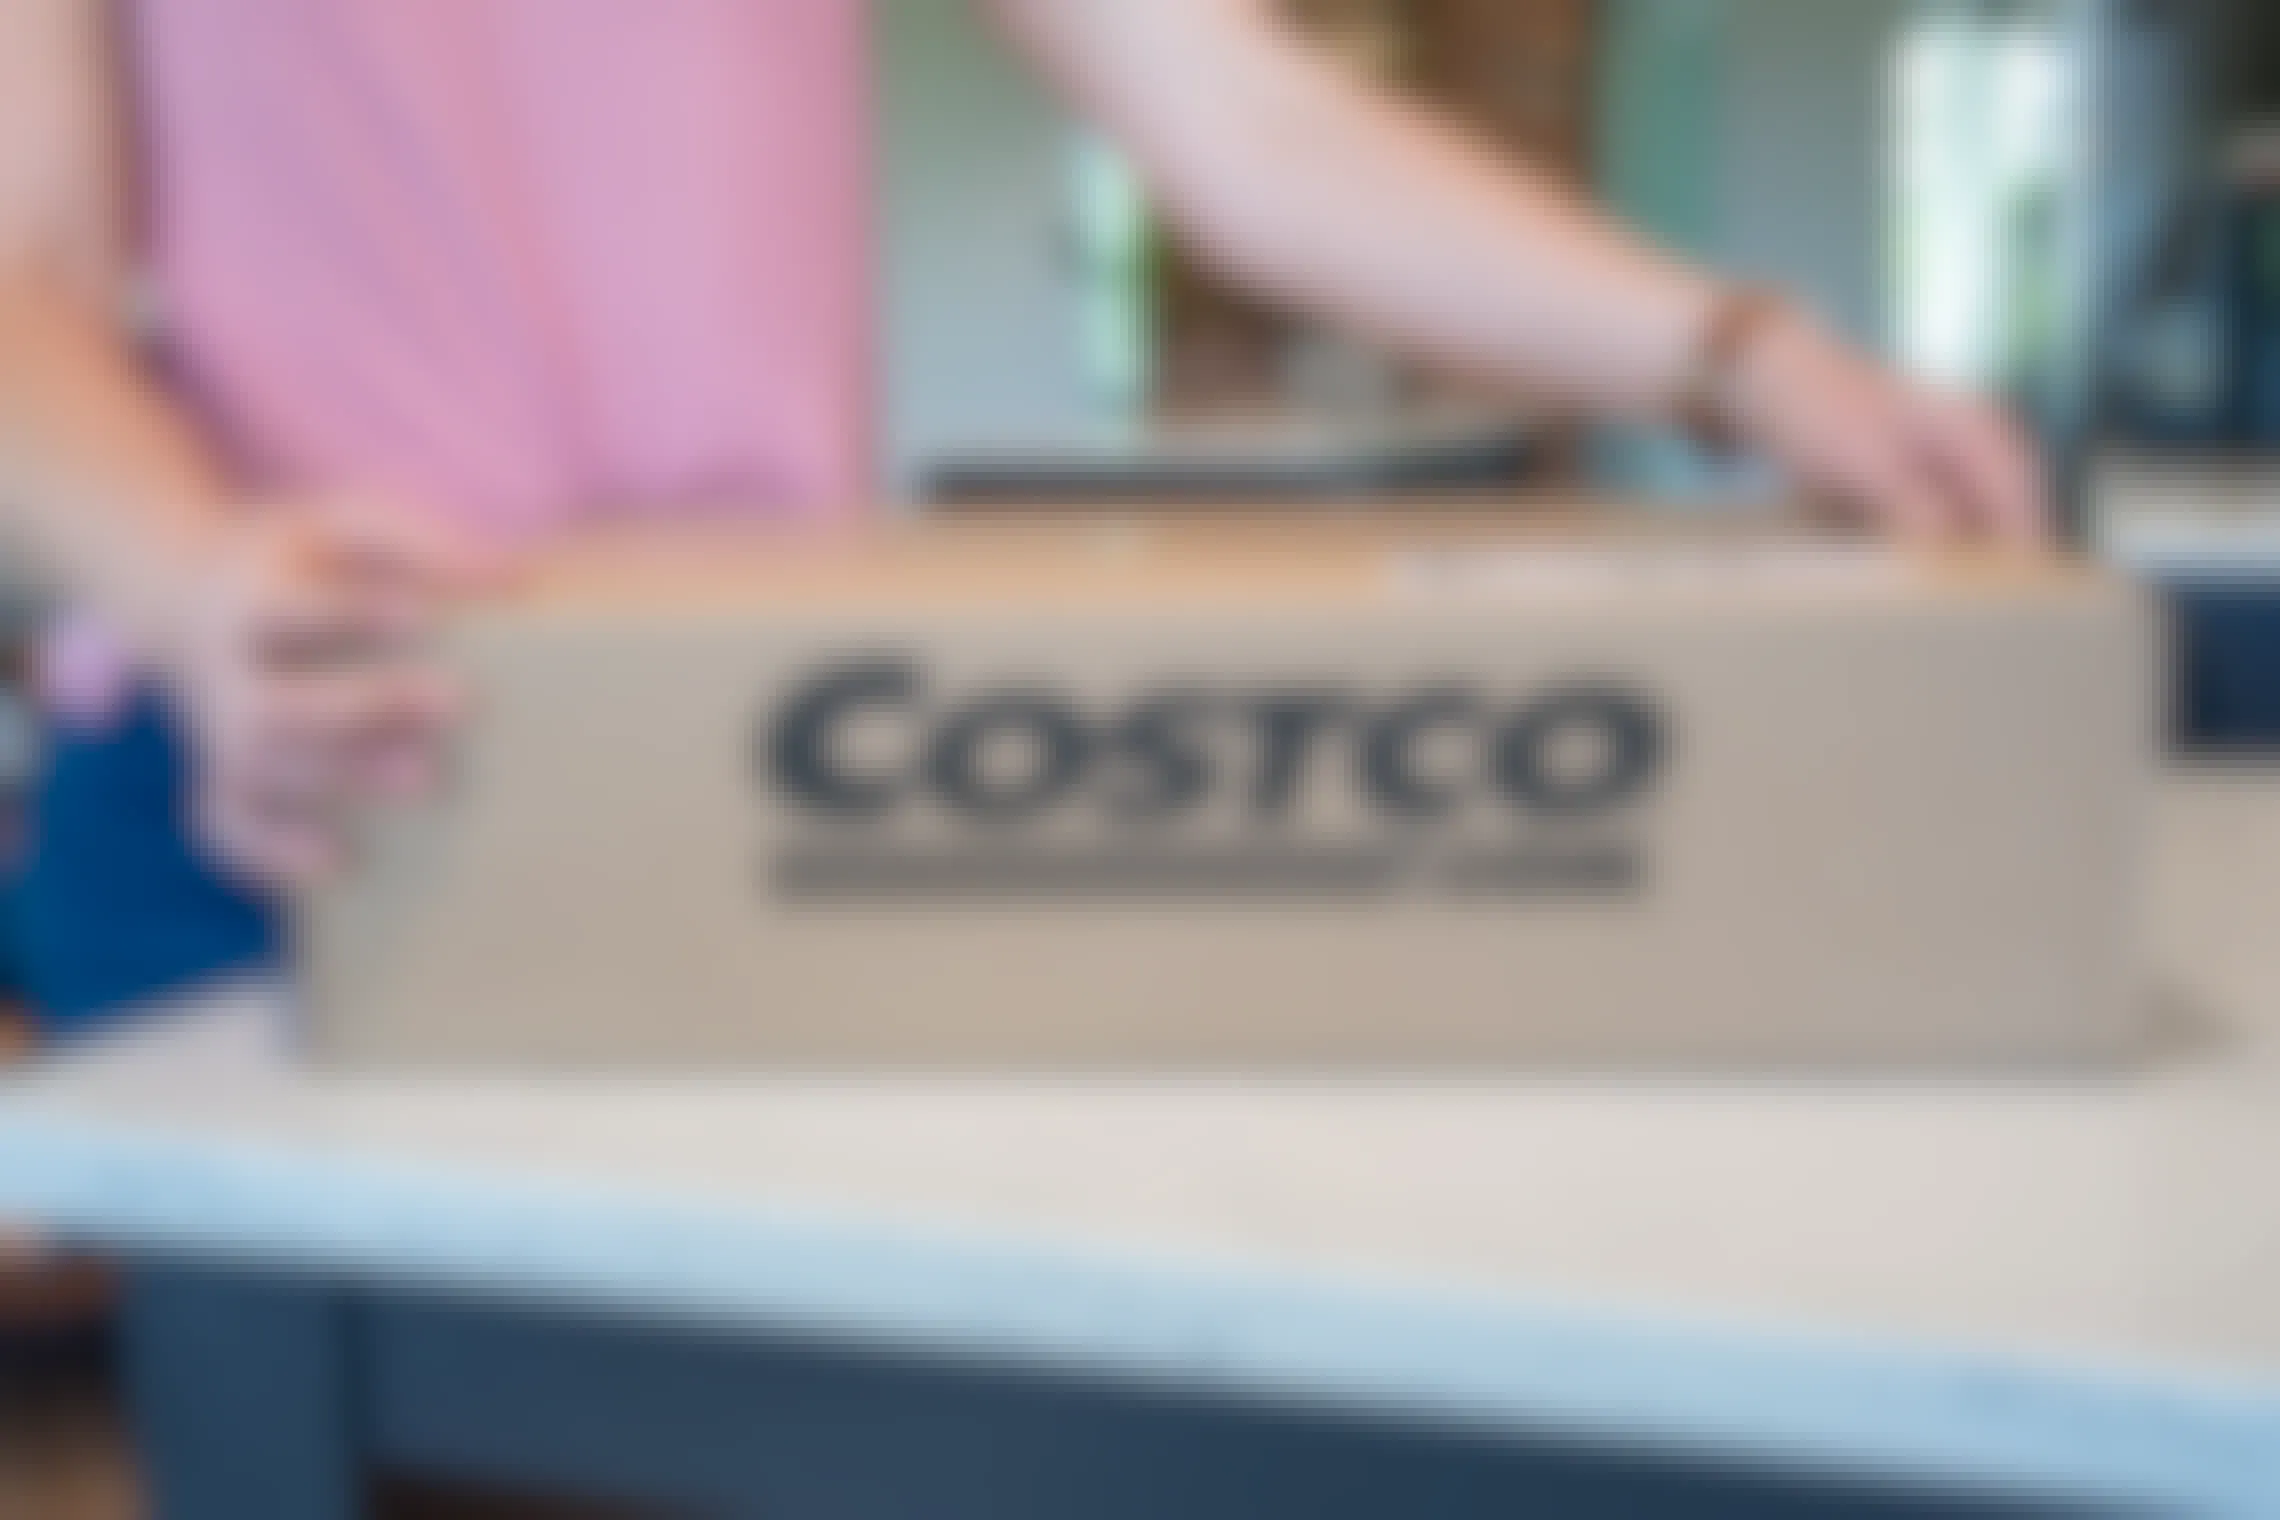 A person opening a Costco.com online order box.